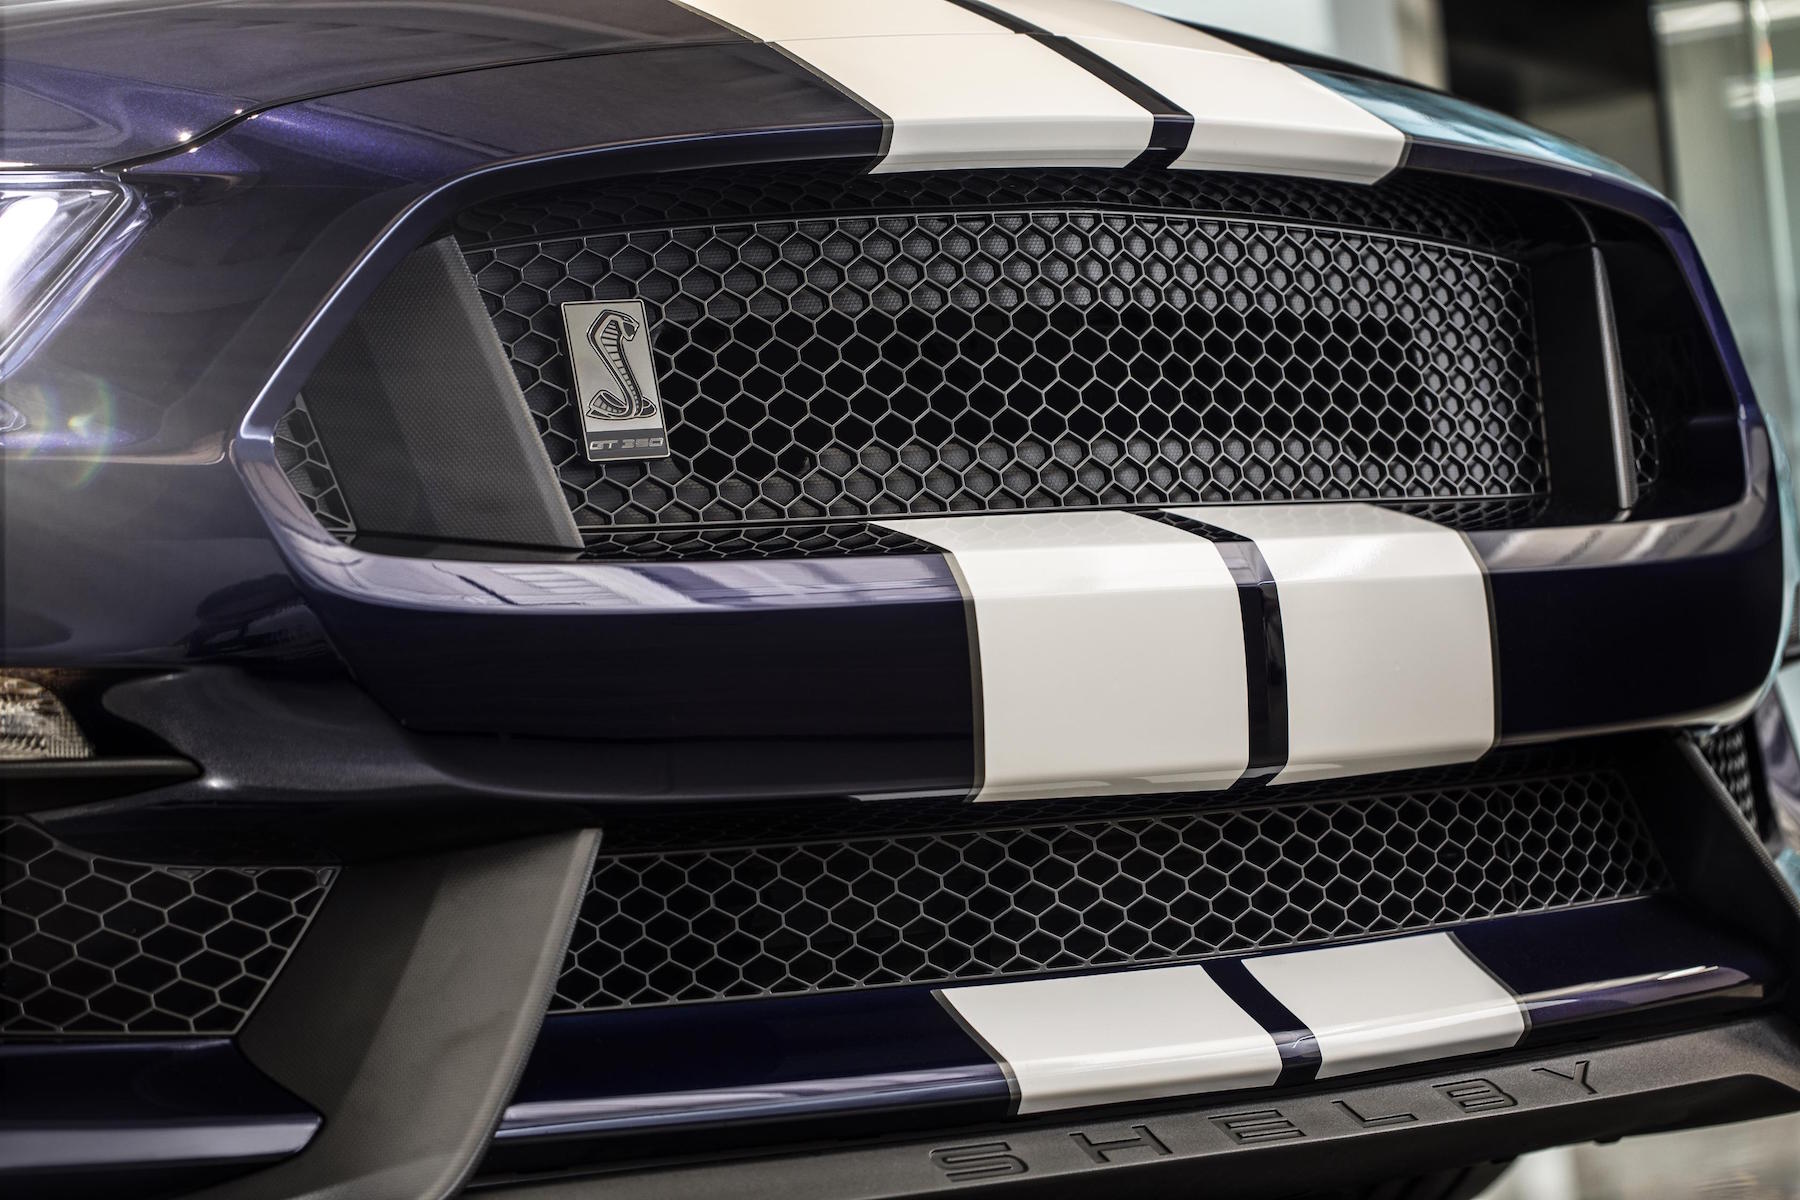 New 2019 Ford Mustang Shelby GT350